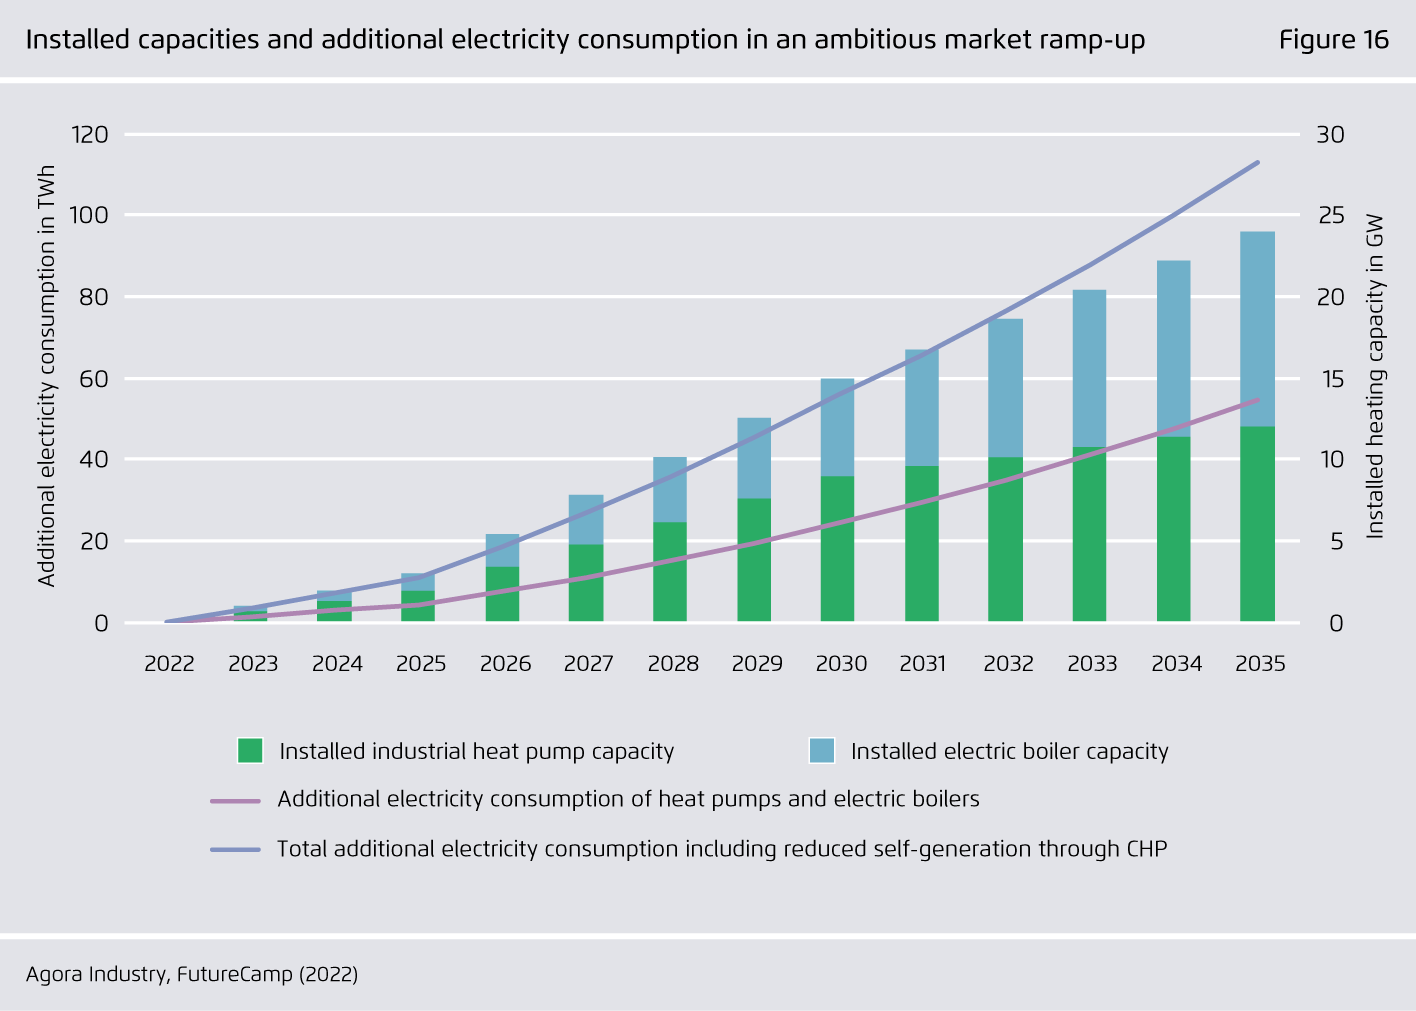 Preview for Installed capacities and additional electricity consumption in an ambitious market ramp-up